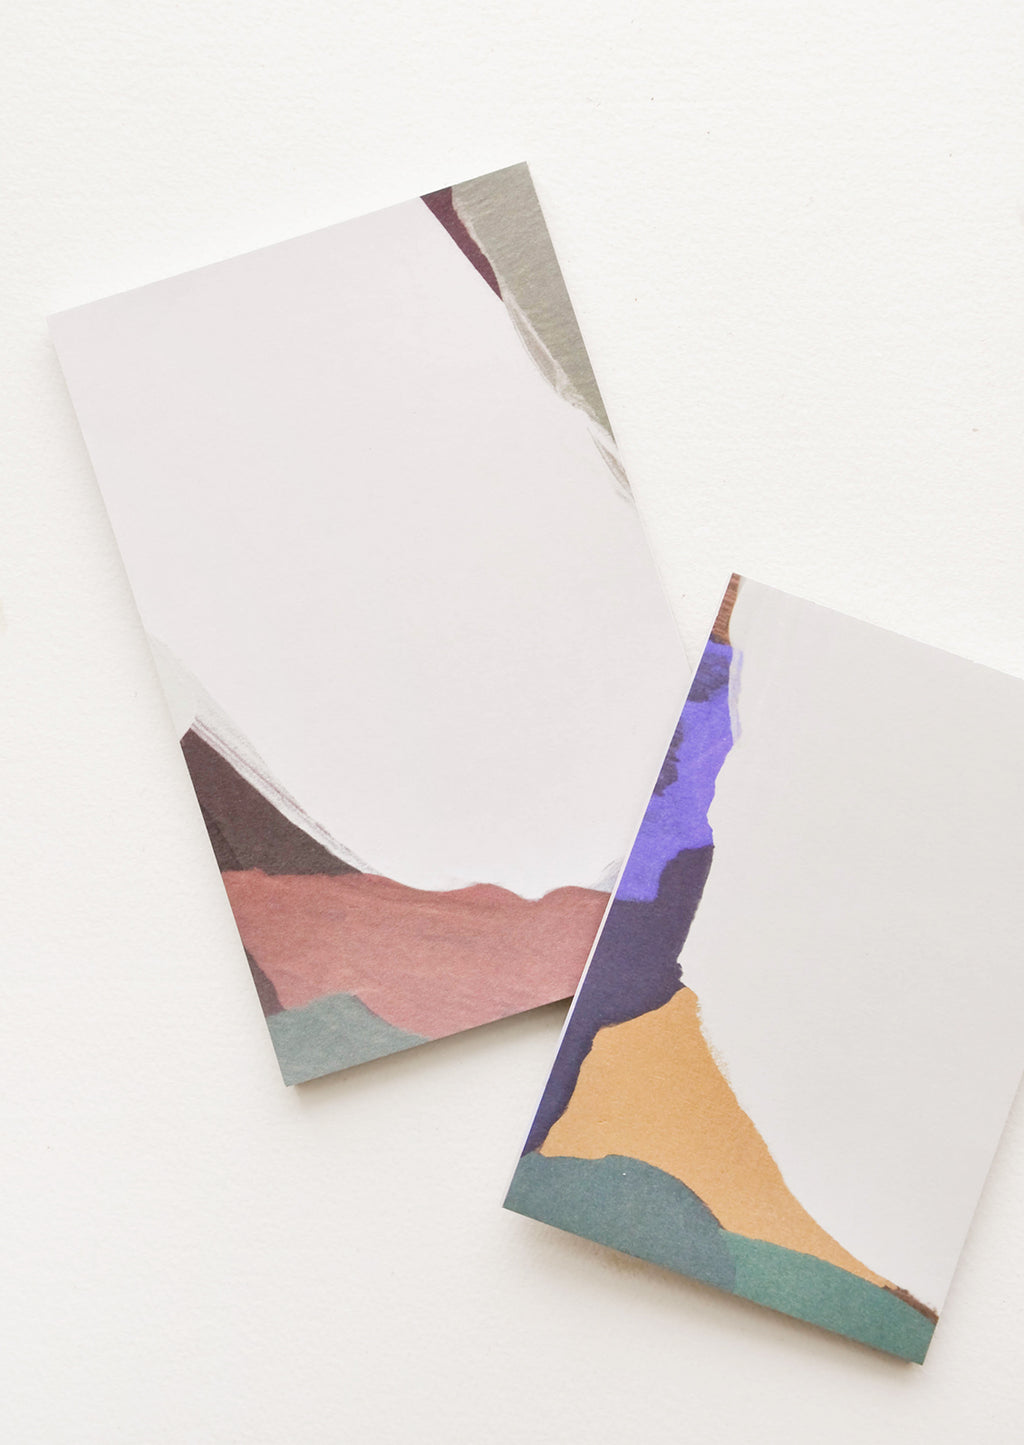 4: Two notepads, decorated with colorful abstract shapes.